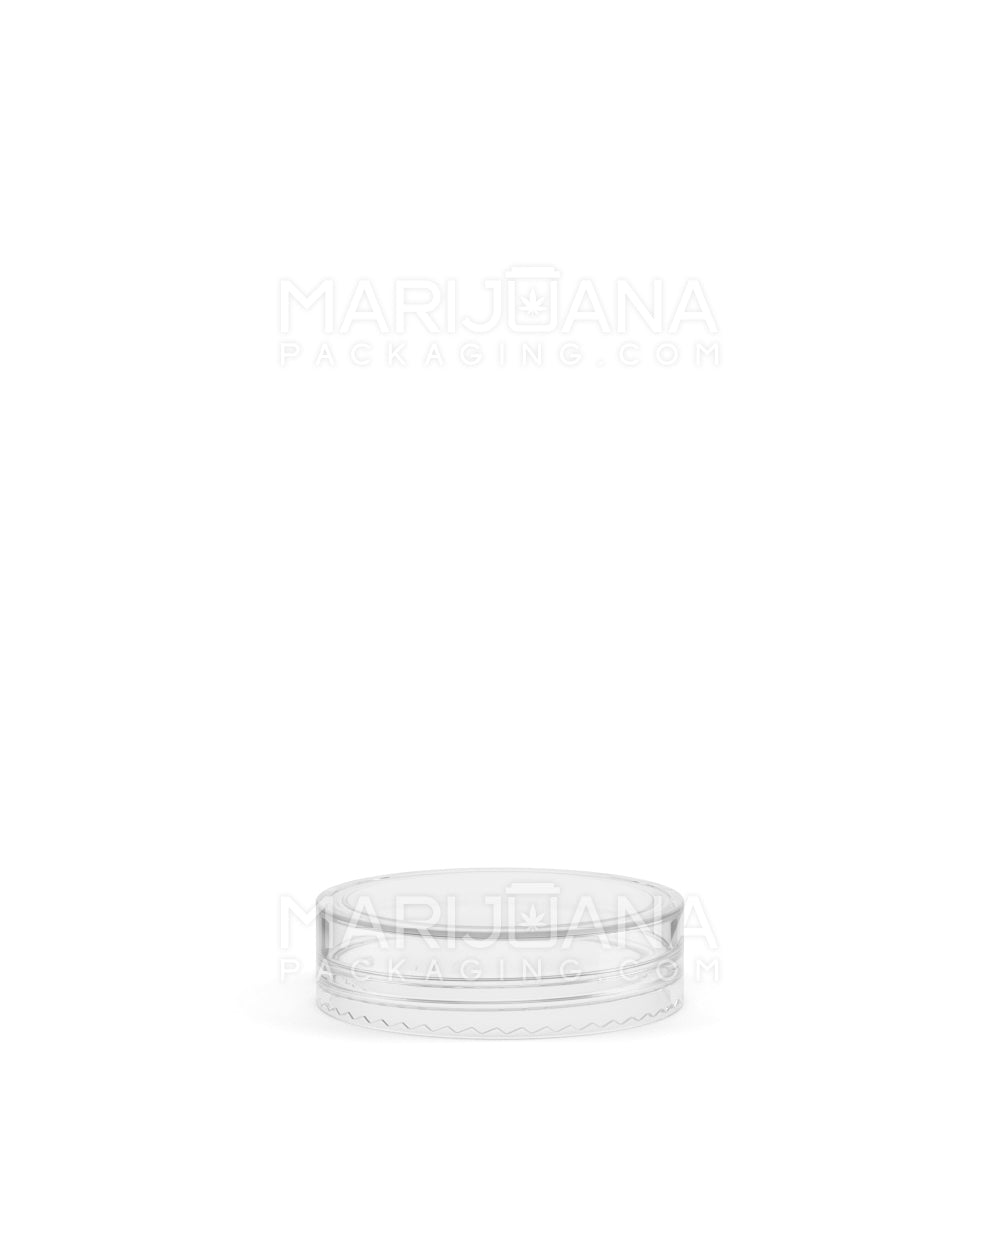 Clear Concentrate Containers w/ Screw Top Cap & White Silicone Insert | 7mL - Plastic - 100 Count - 12